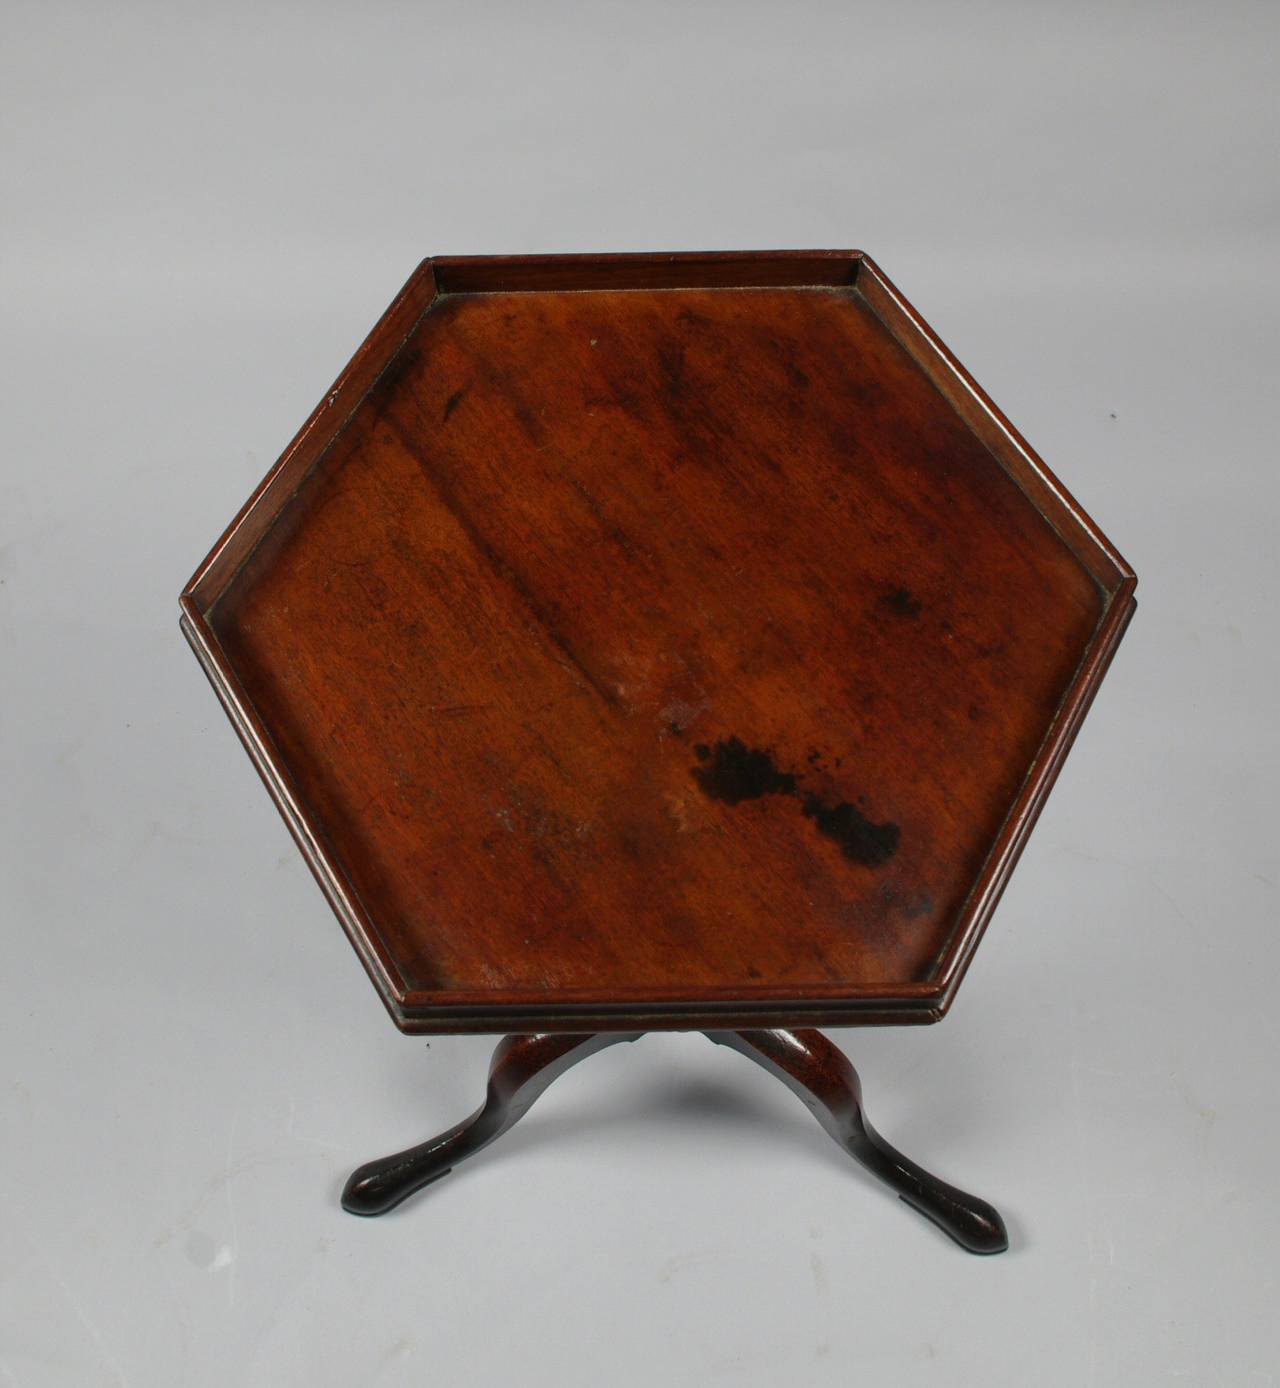 George III mahogany tripod wine table, the hexagonal galleried top with delicate string inlay to the edge; the well-turned center post raised on three cabriole legs with slipper feet.

This elegant little table differs from the more conventional